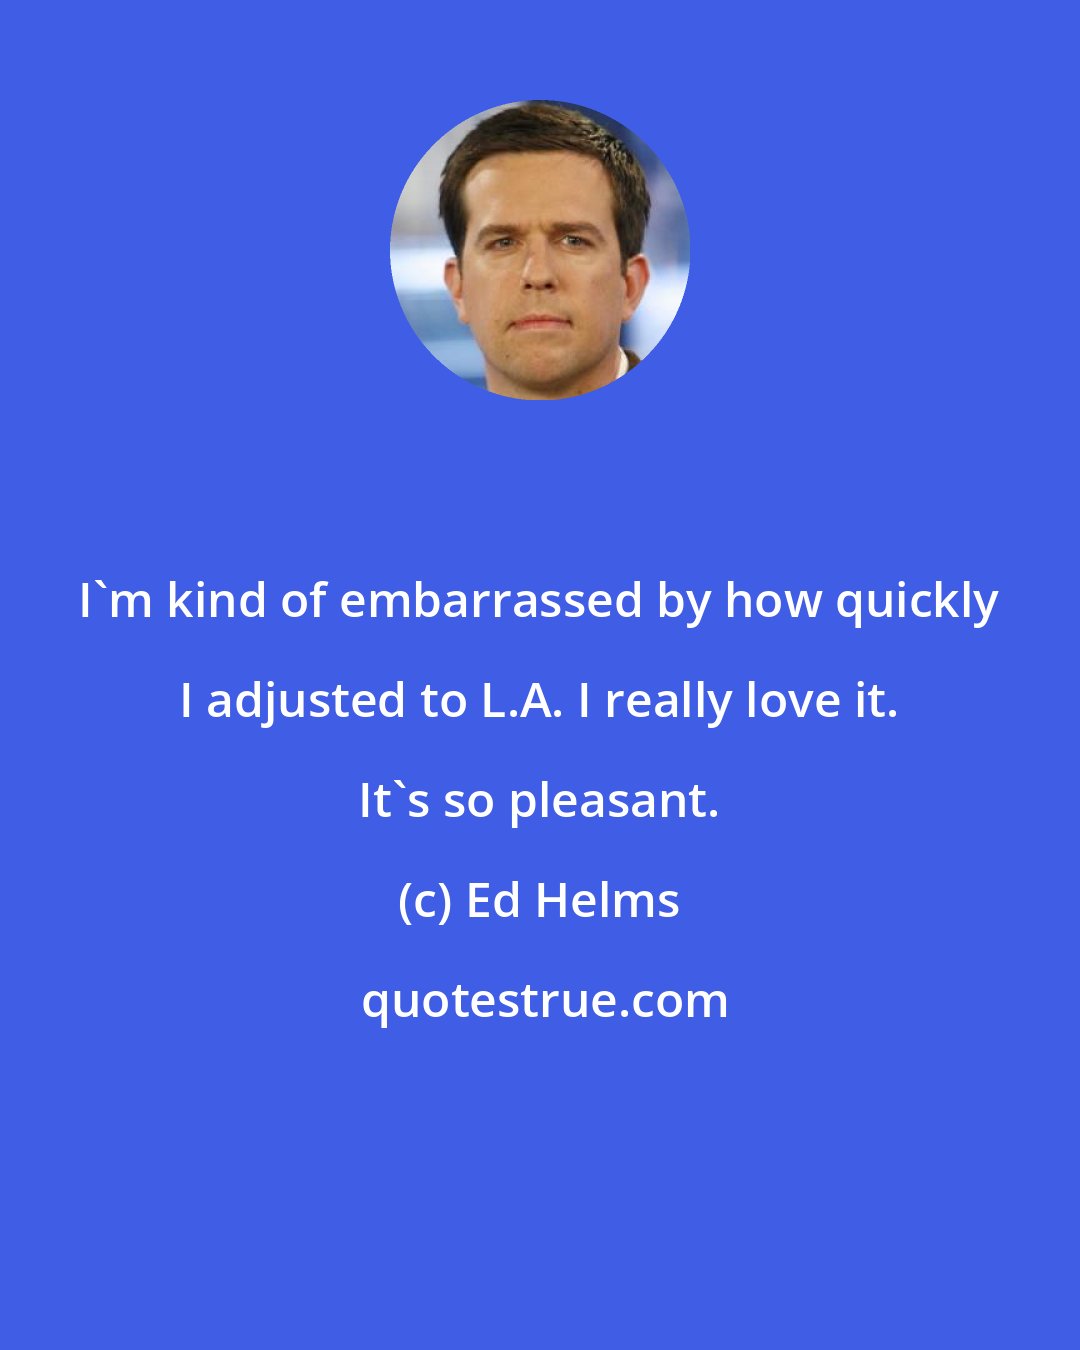 Ed Helms: I'm kind of embarrassed by how quickly I adjusted to L.A. I really love it. It's so pleasant.